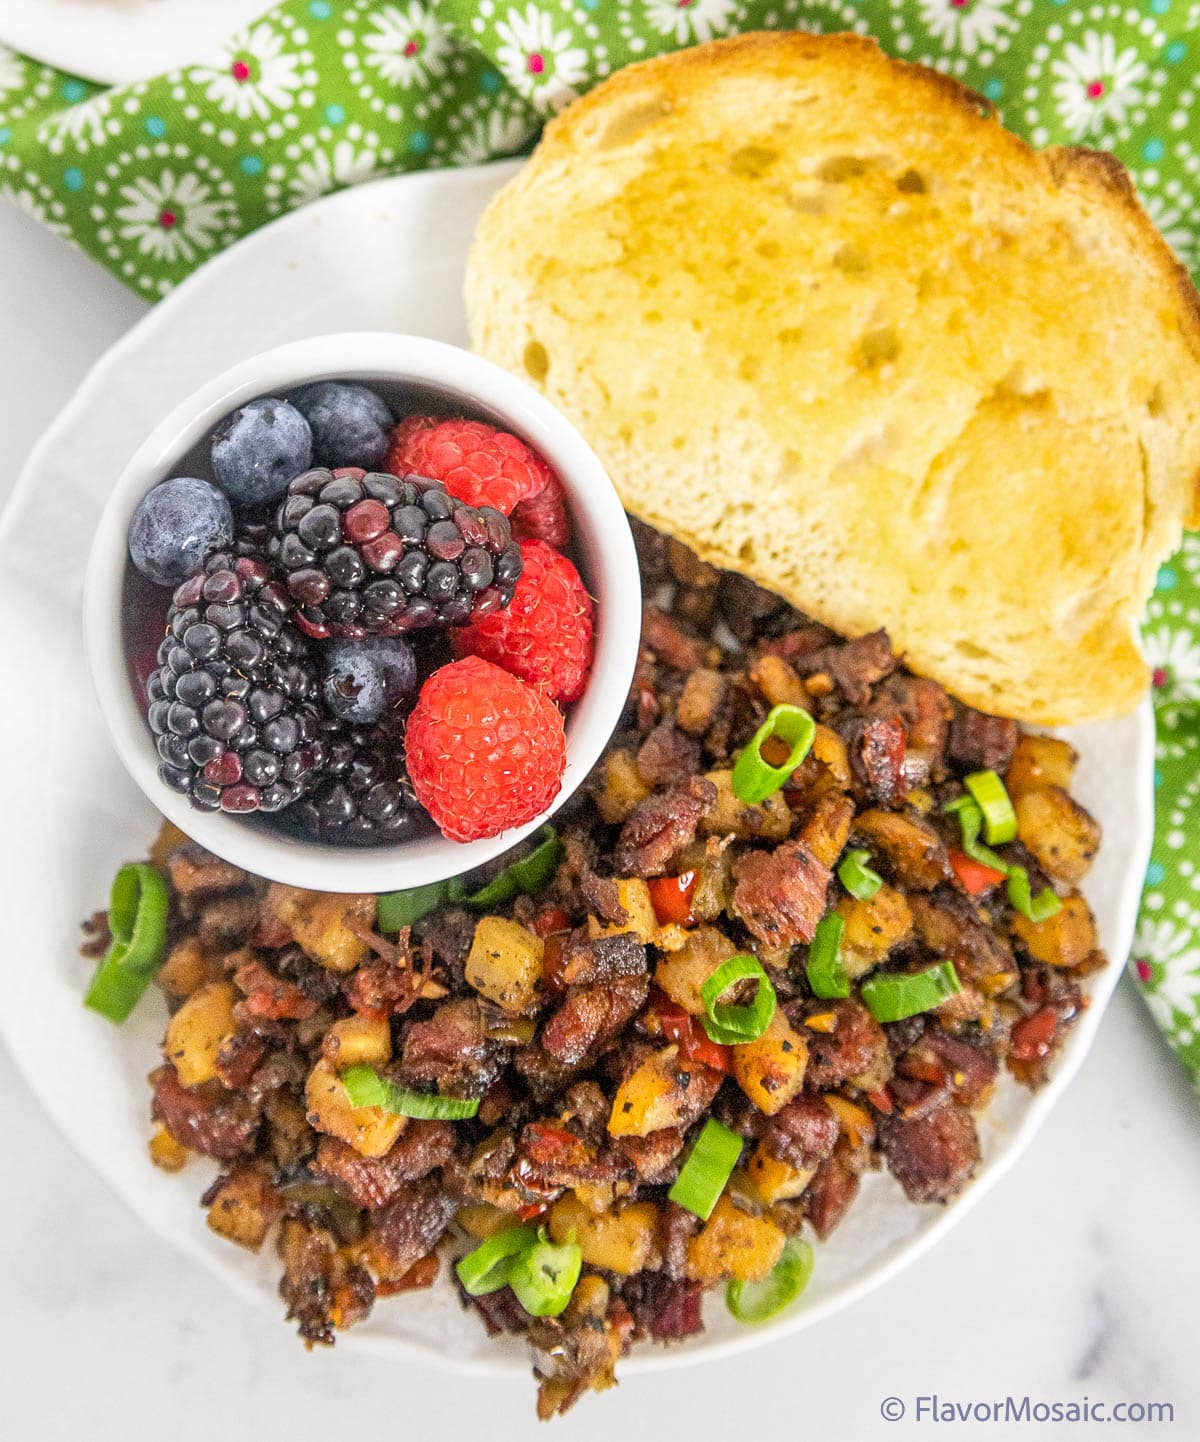 Overhead view of corned beef hash on a white plate with a small white bowl of blackberries and raspberries with a piece of toast next to the hash on the plate with a green napkin with white flowers in the upper right background.